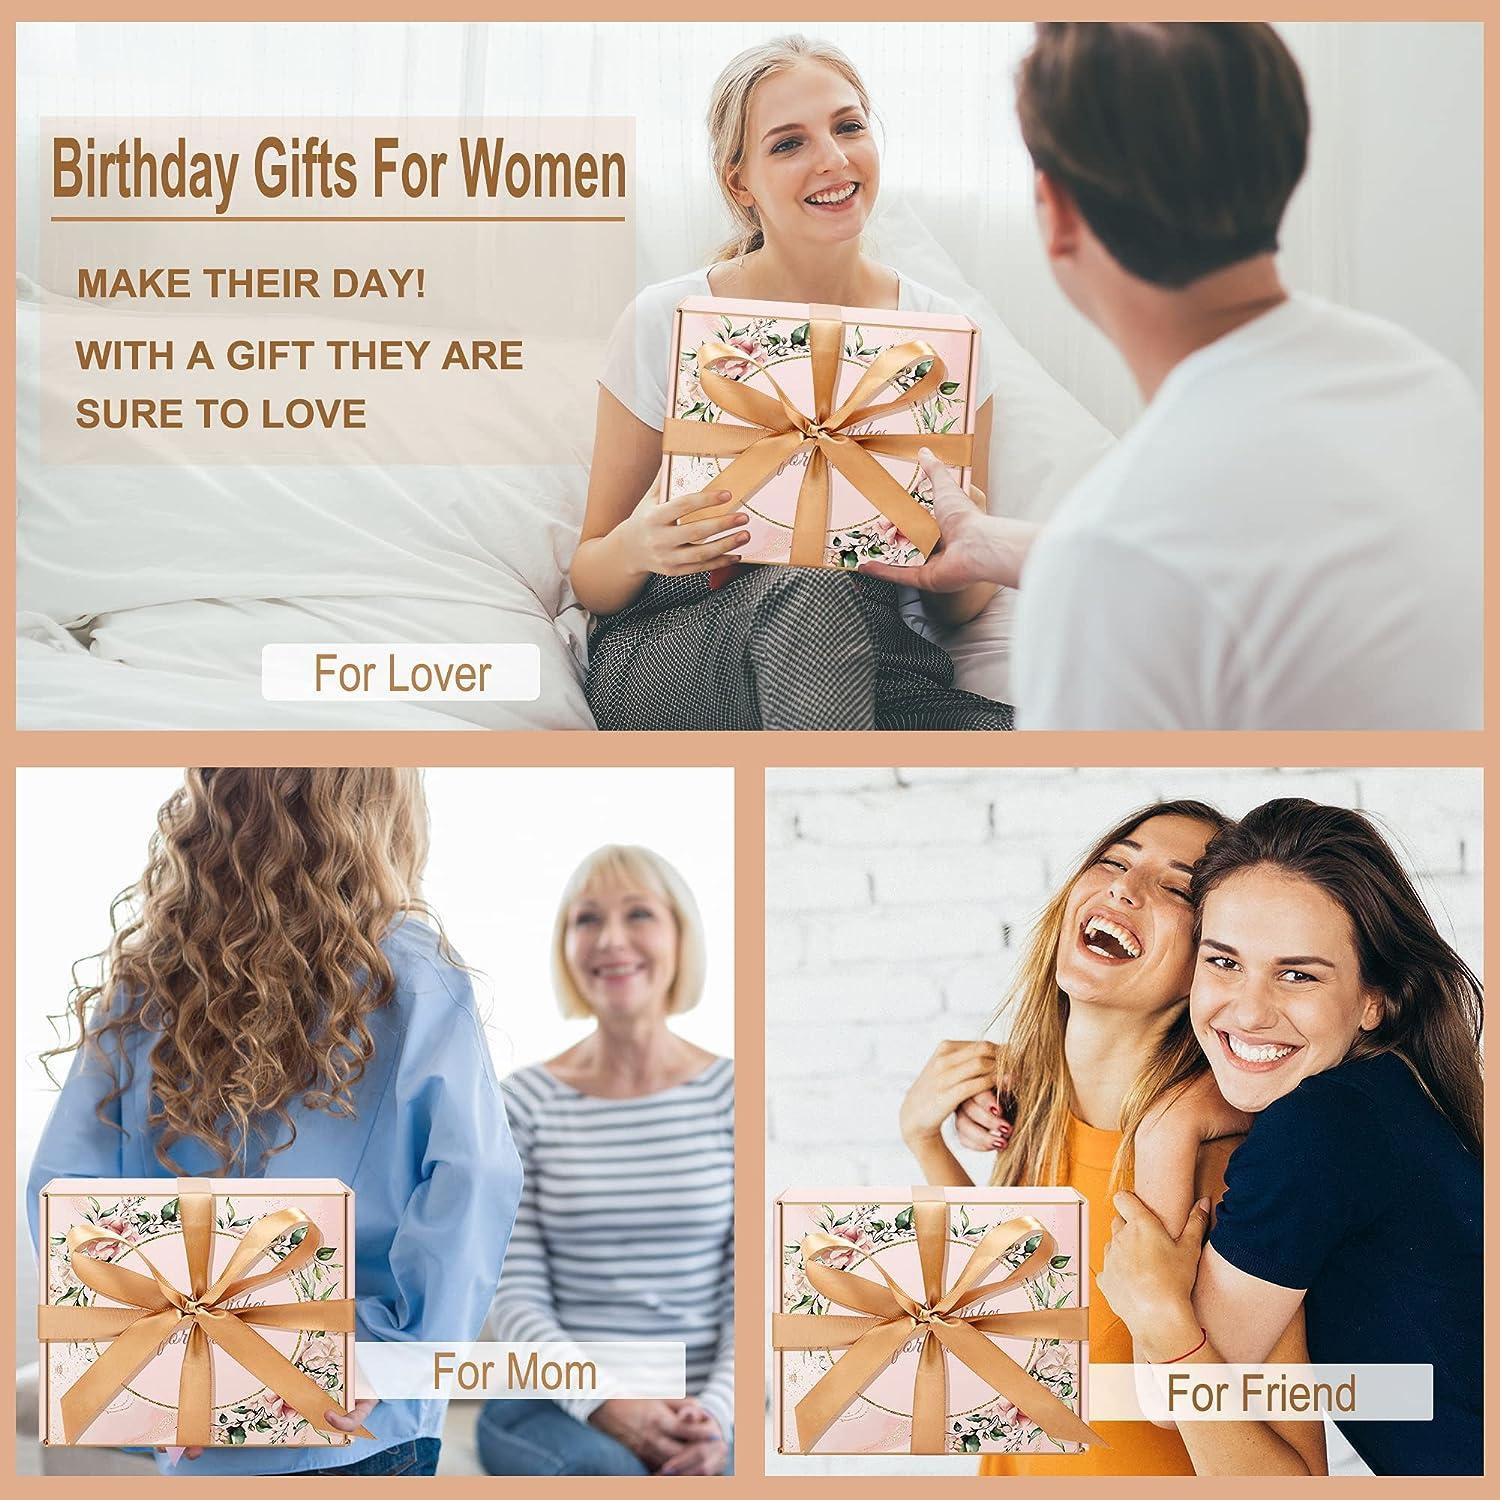 Birthday Gifts for Women Relaxation Gifts for Mom Spa Basket for Best  Friends Unique Gifts for Women Sleep Well Gift Set Self Care Gifts Get Well  Soon Gifts for Sister Wife Her